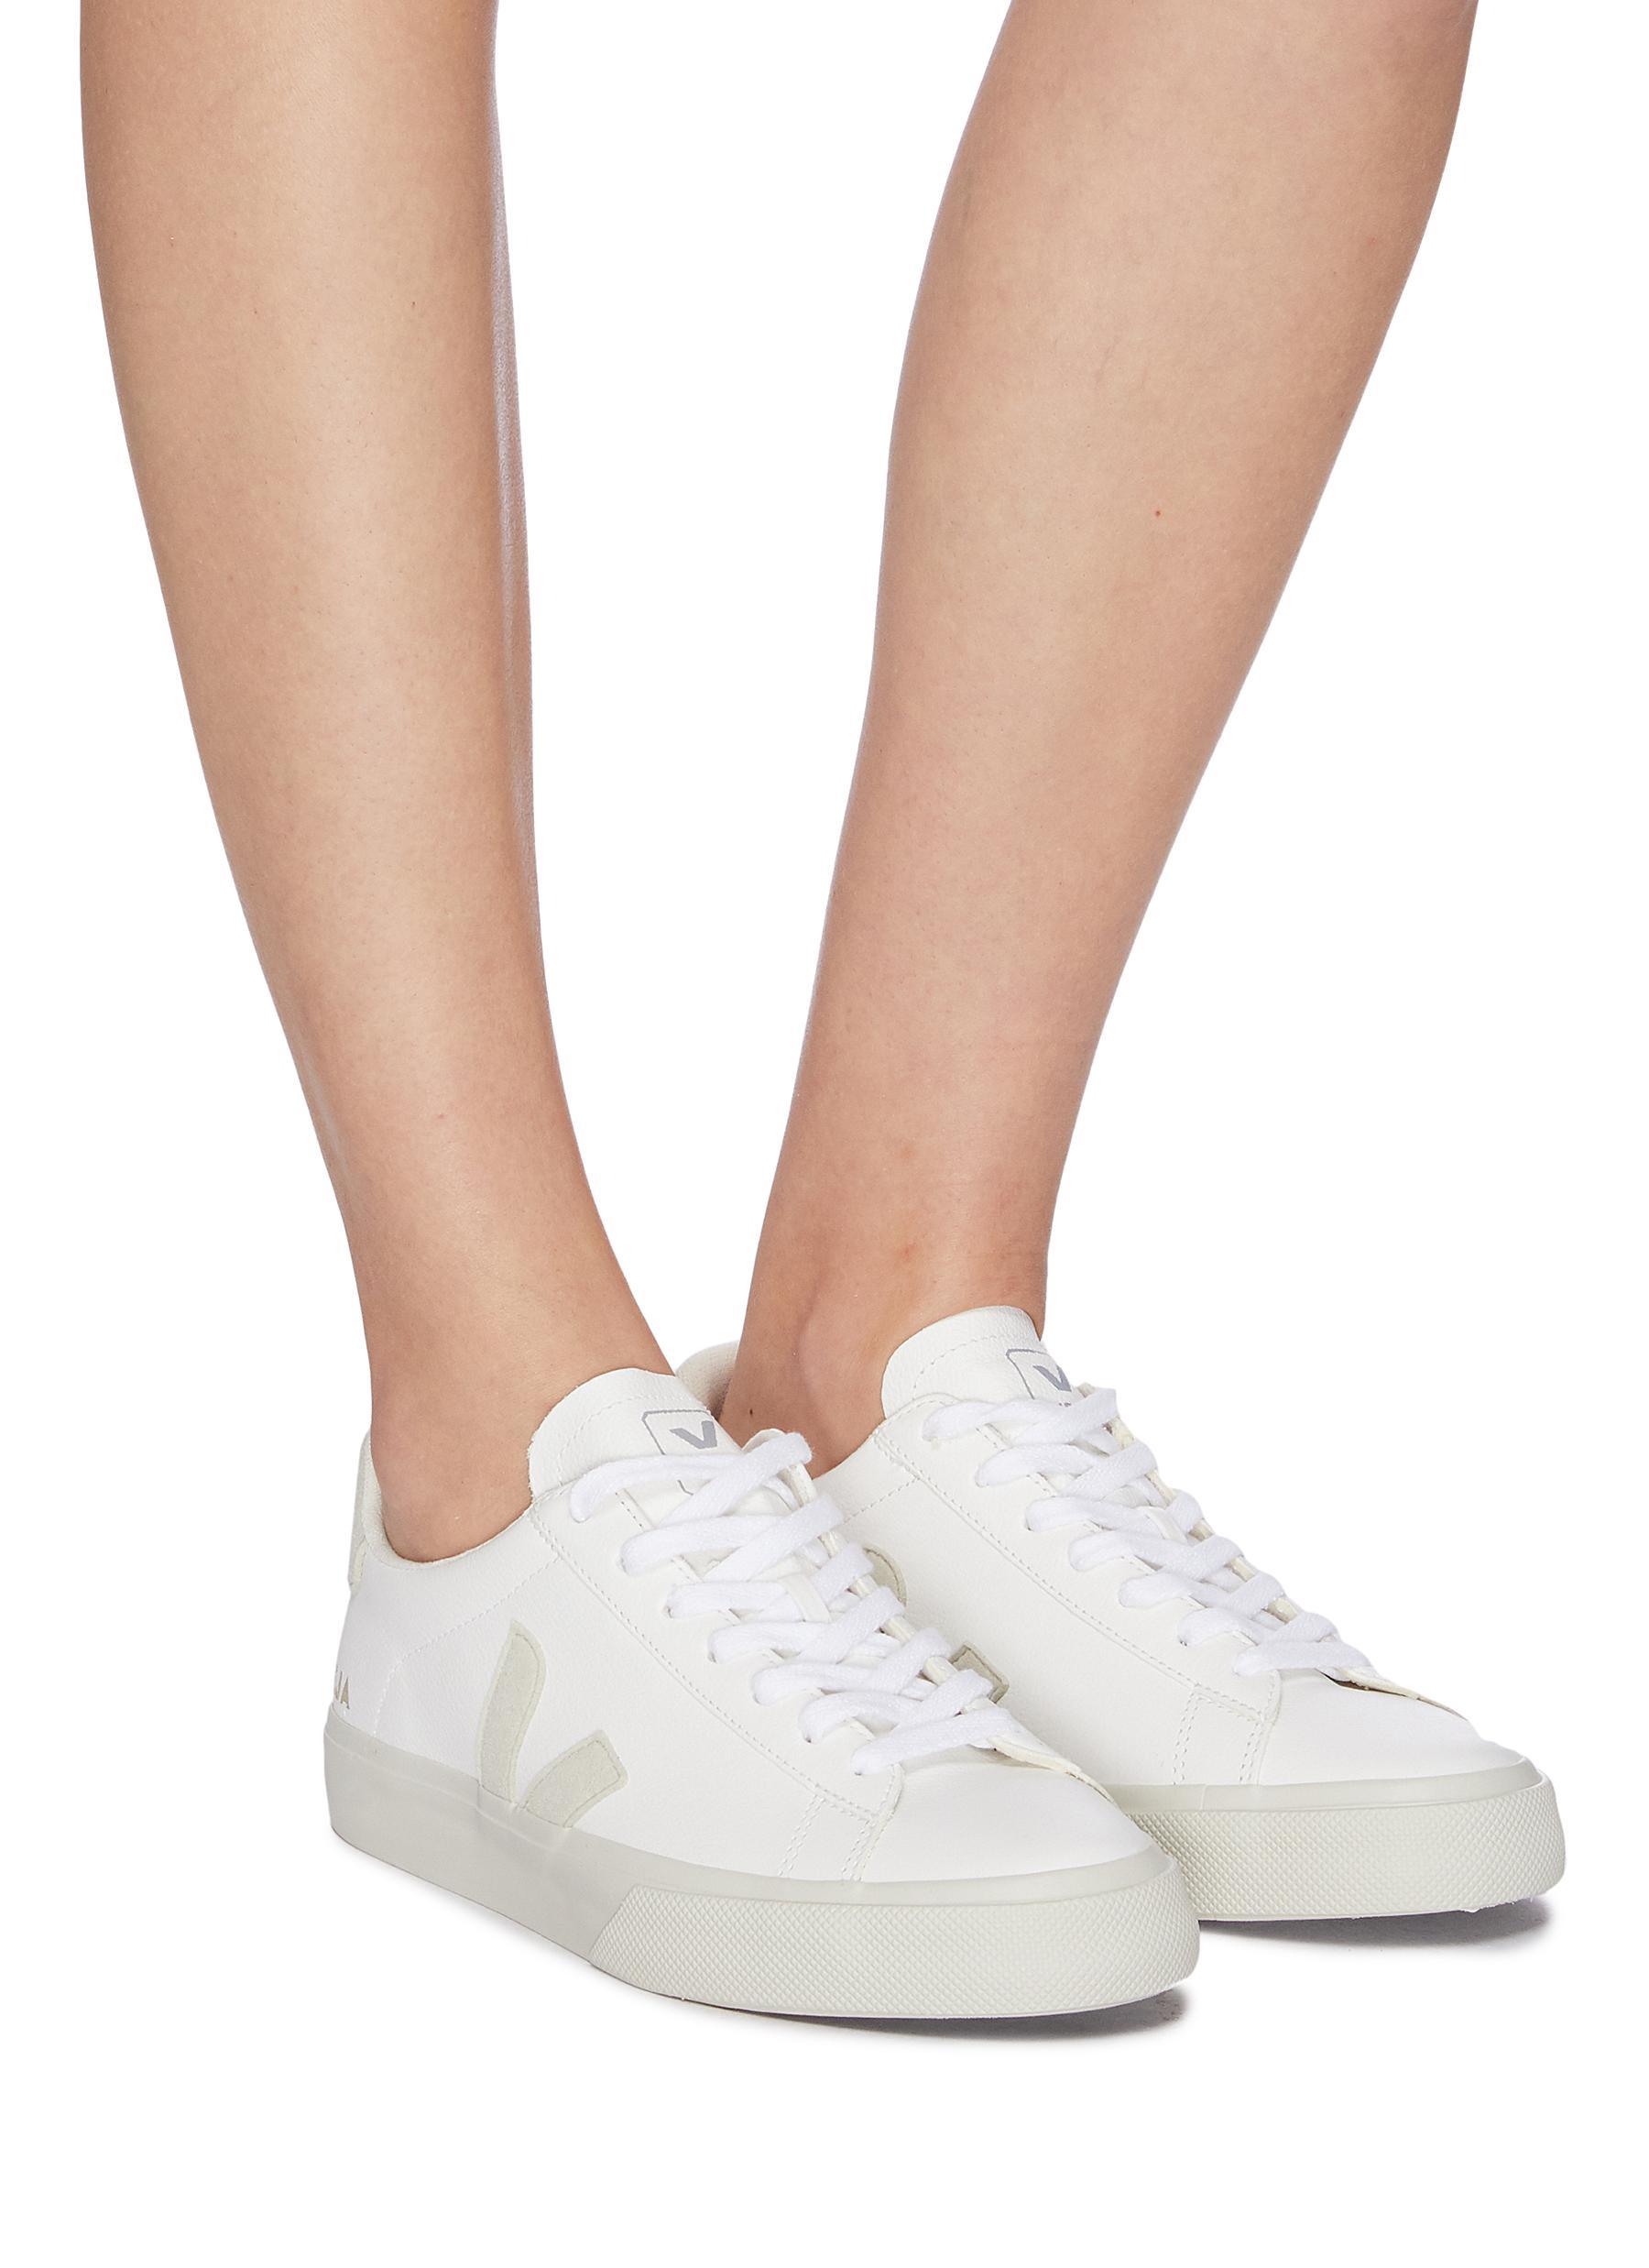 Veja 'campo' Vegan Leather Sneakers in White / Natural (White) - Lyst